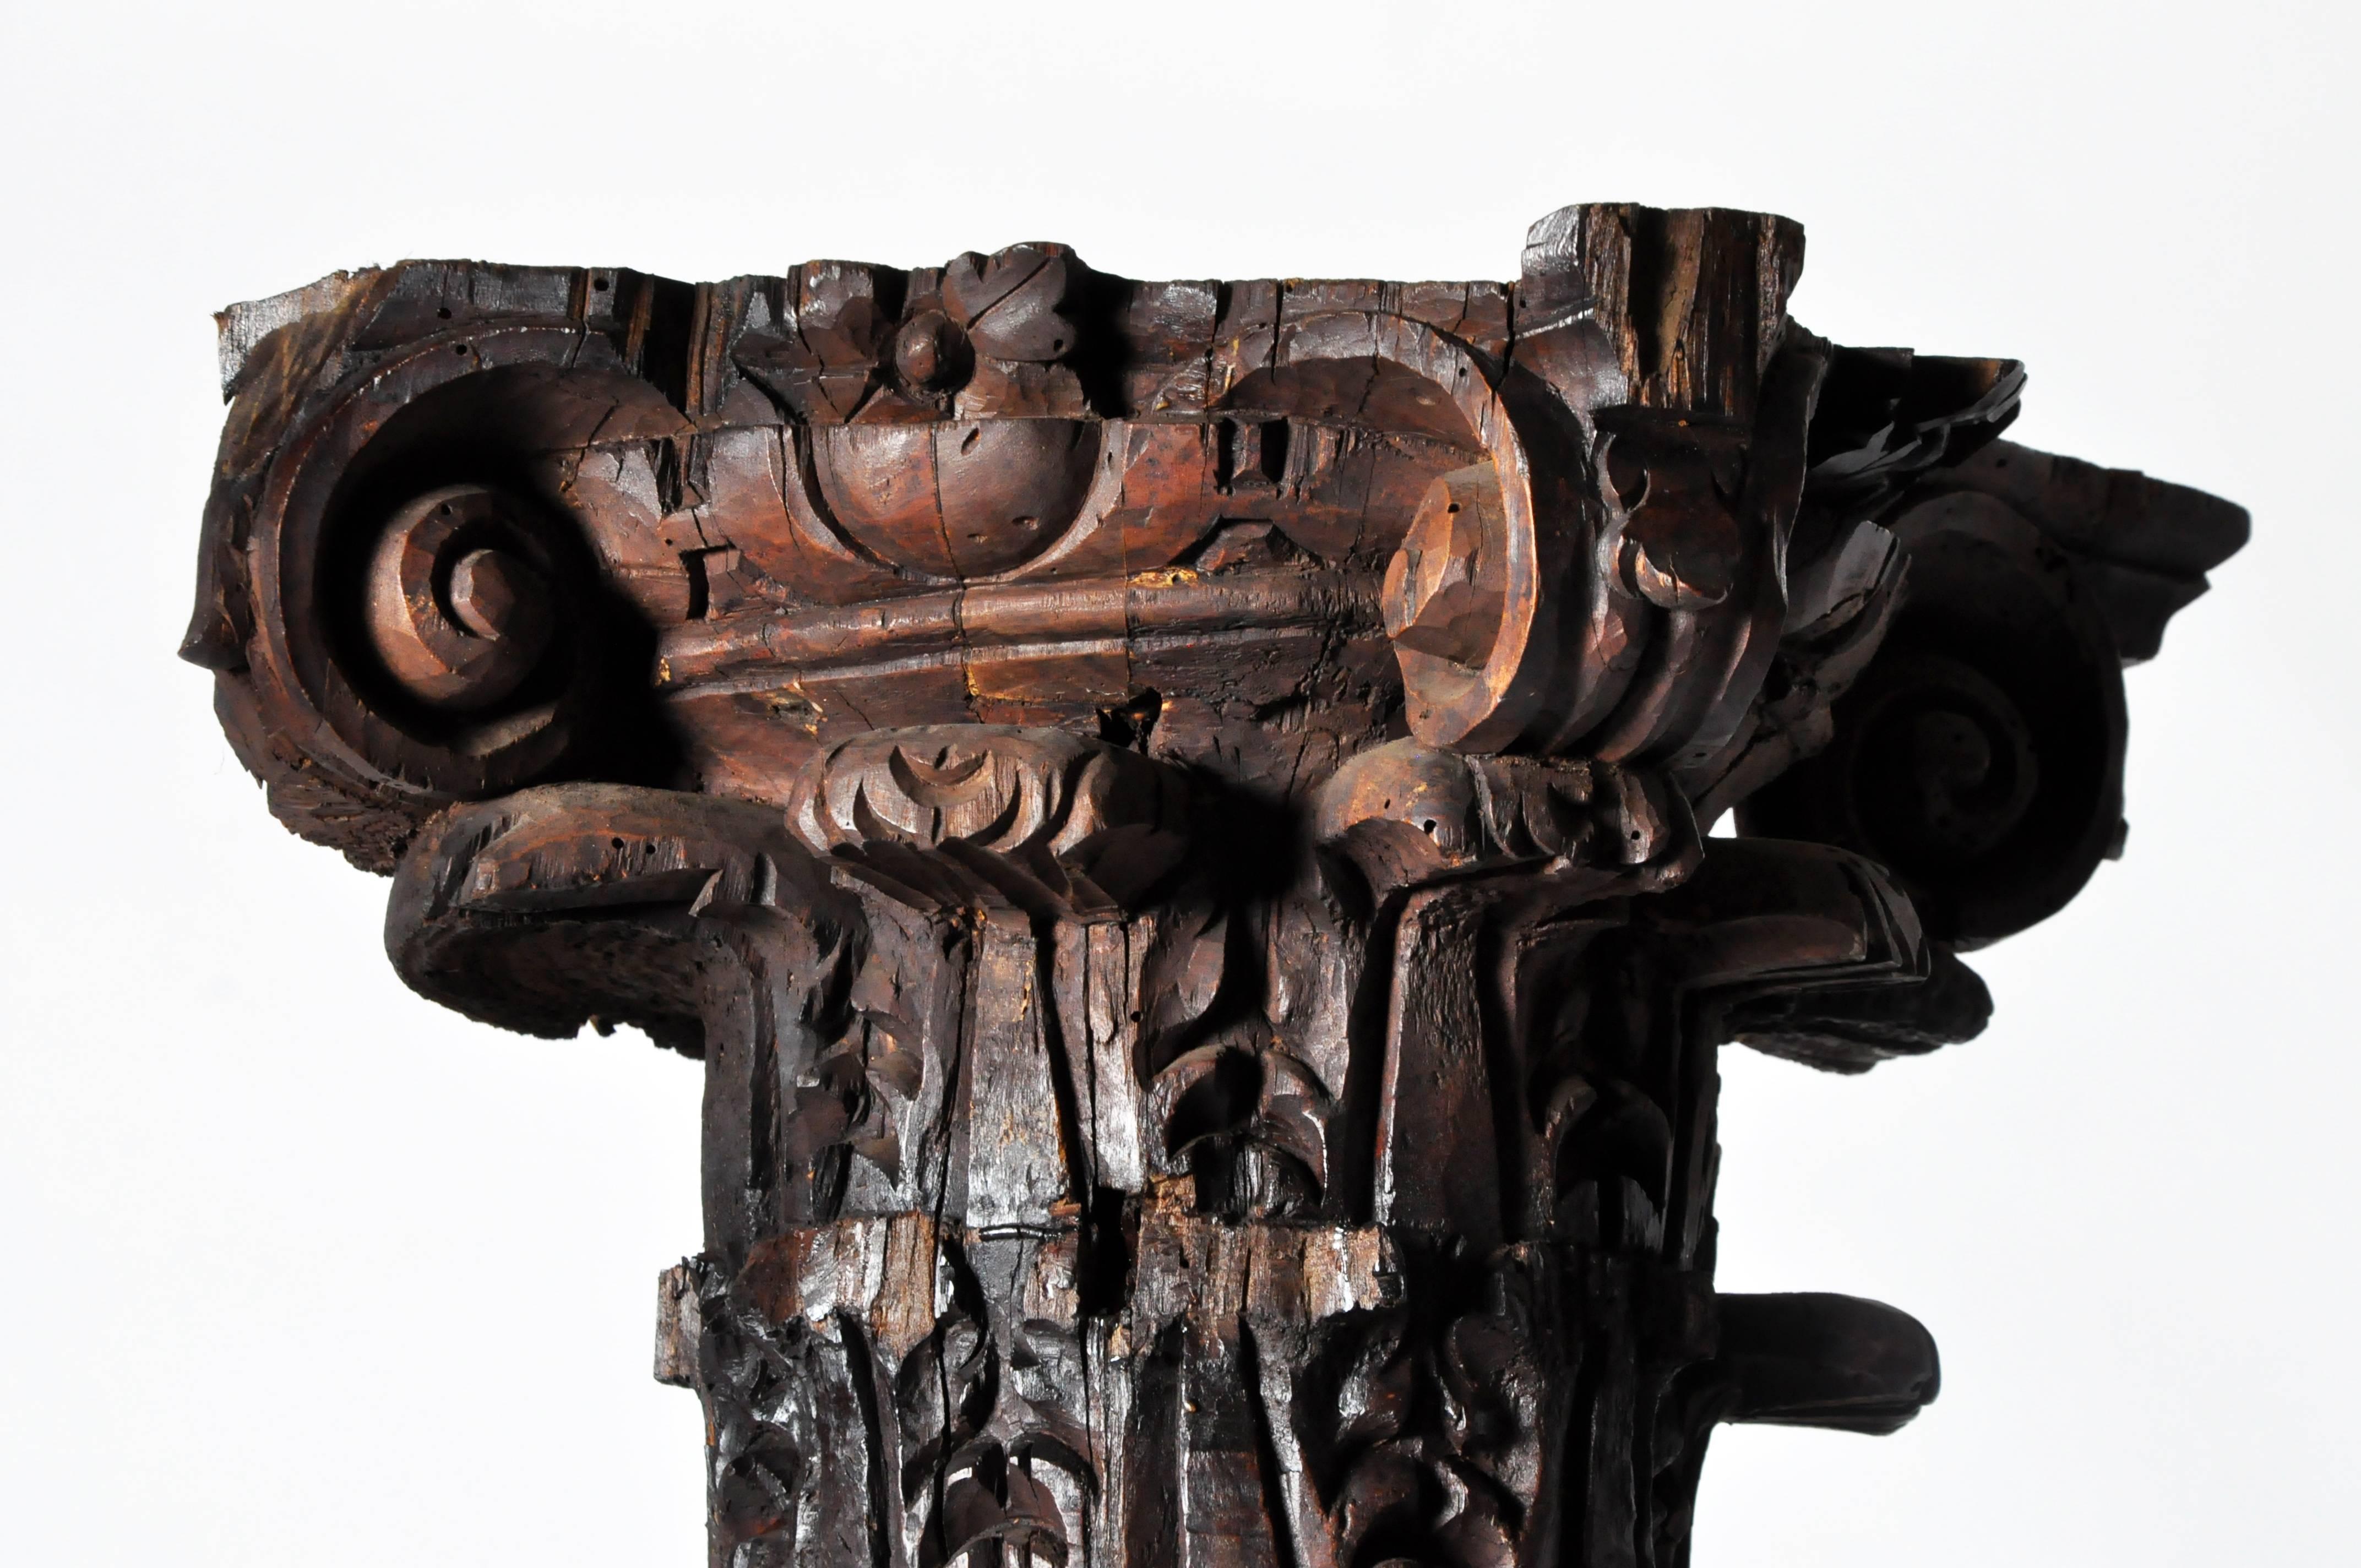 Beautifully hand-carved Corinthian capitals with scrolling acanthus leaves surmount the twisted beanstalk-like shafts of these columns. The winding central stems of each are intricately decorated with lifelike figures of birds and leafy grapevines